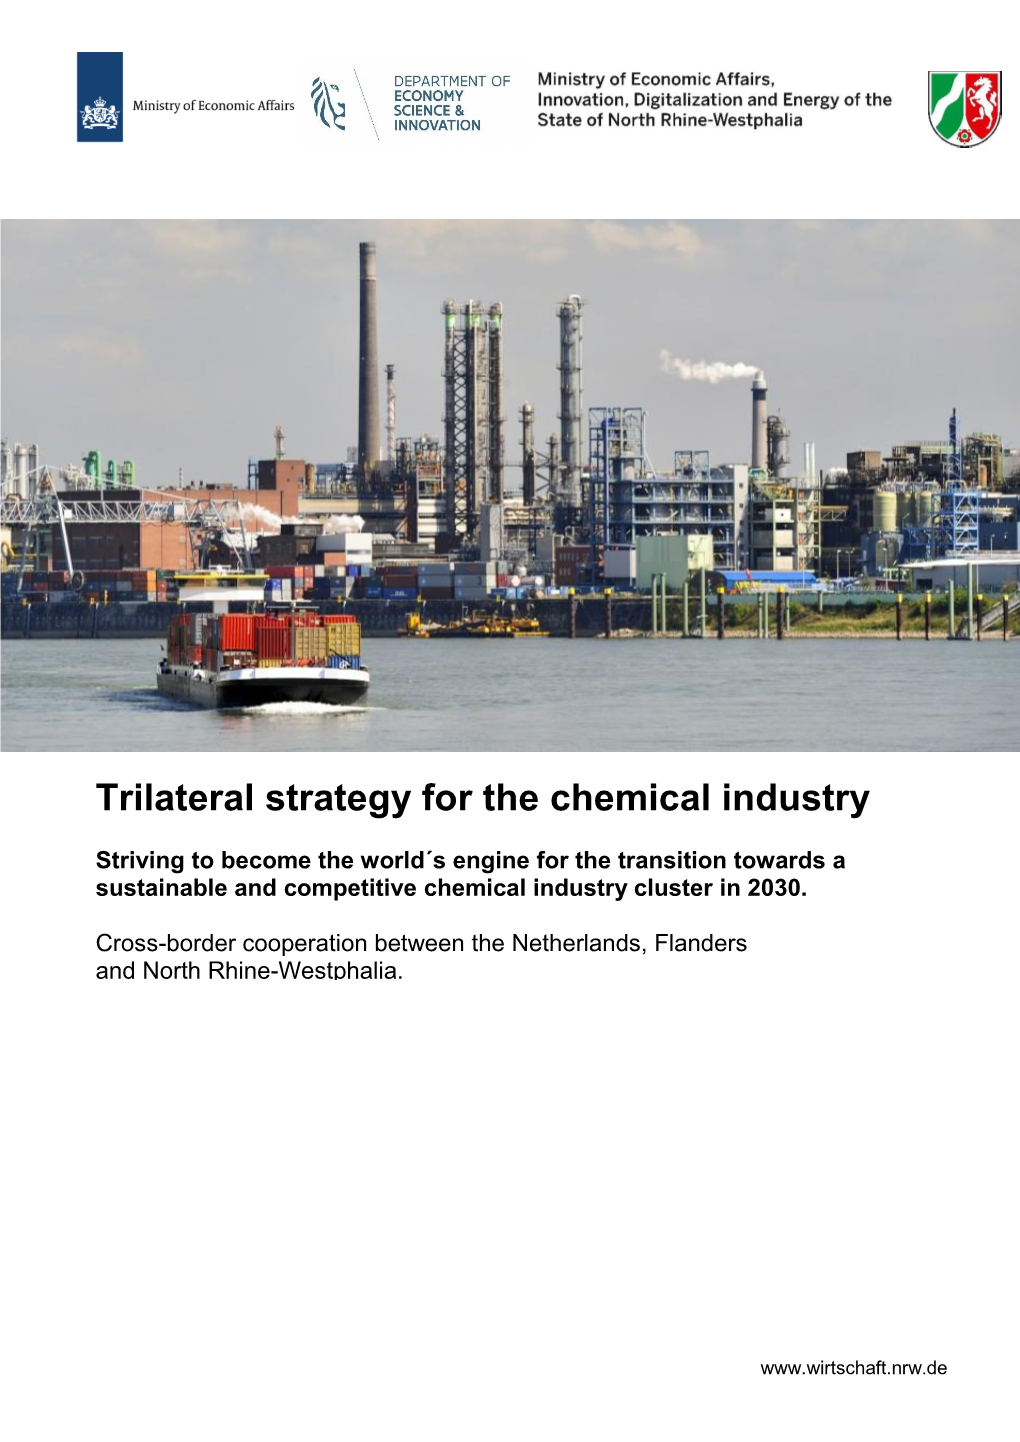 Trilateral Strategy for the Chemical Industry